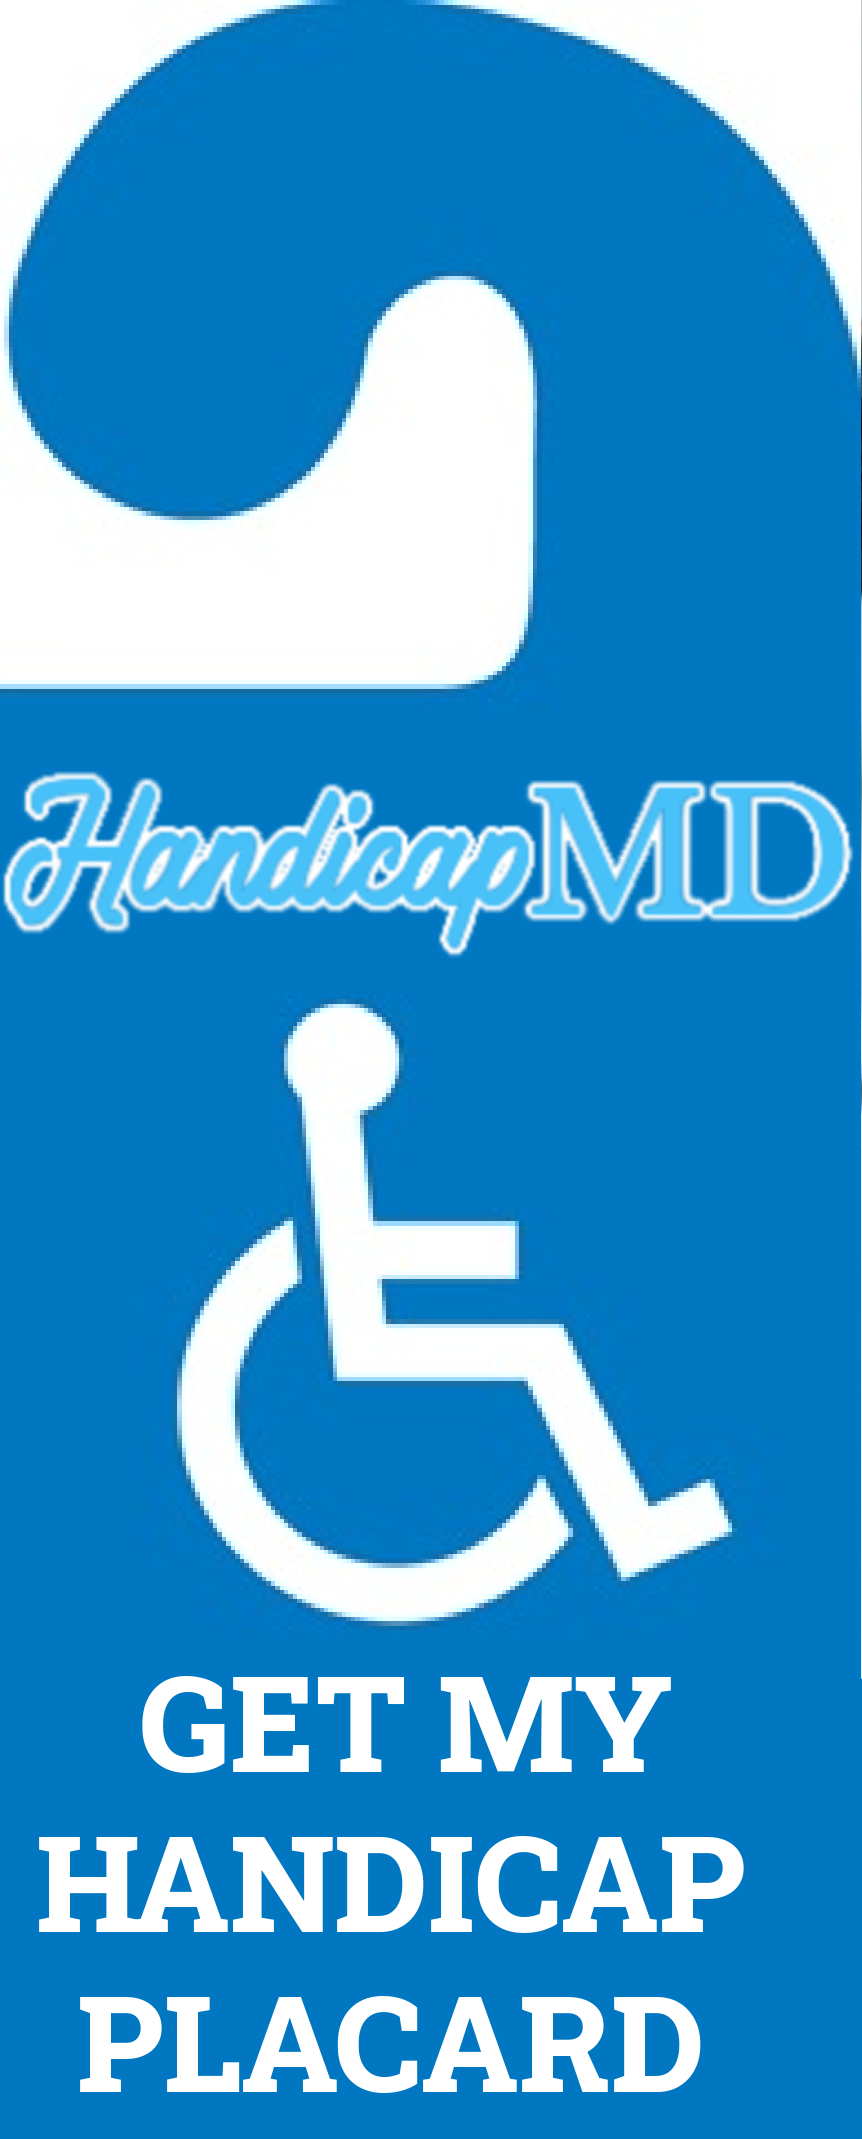 How To Get A Handicap Parking Placard Renewal in Alabama